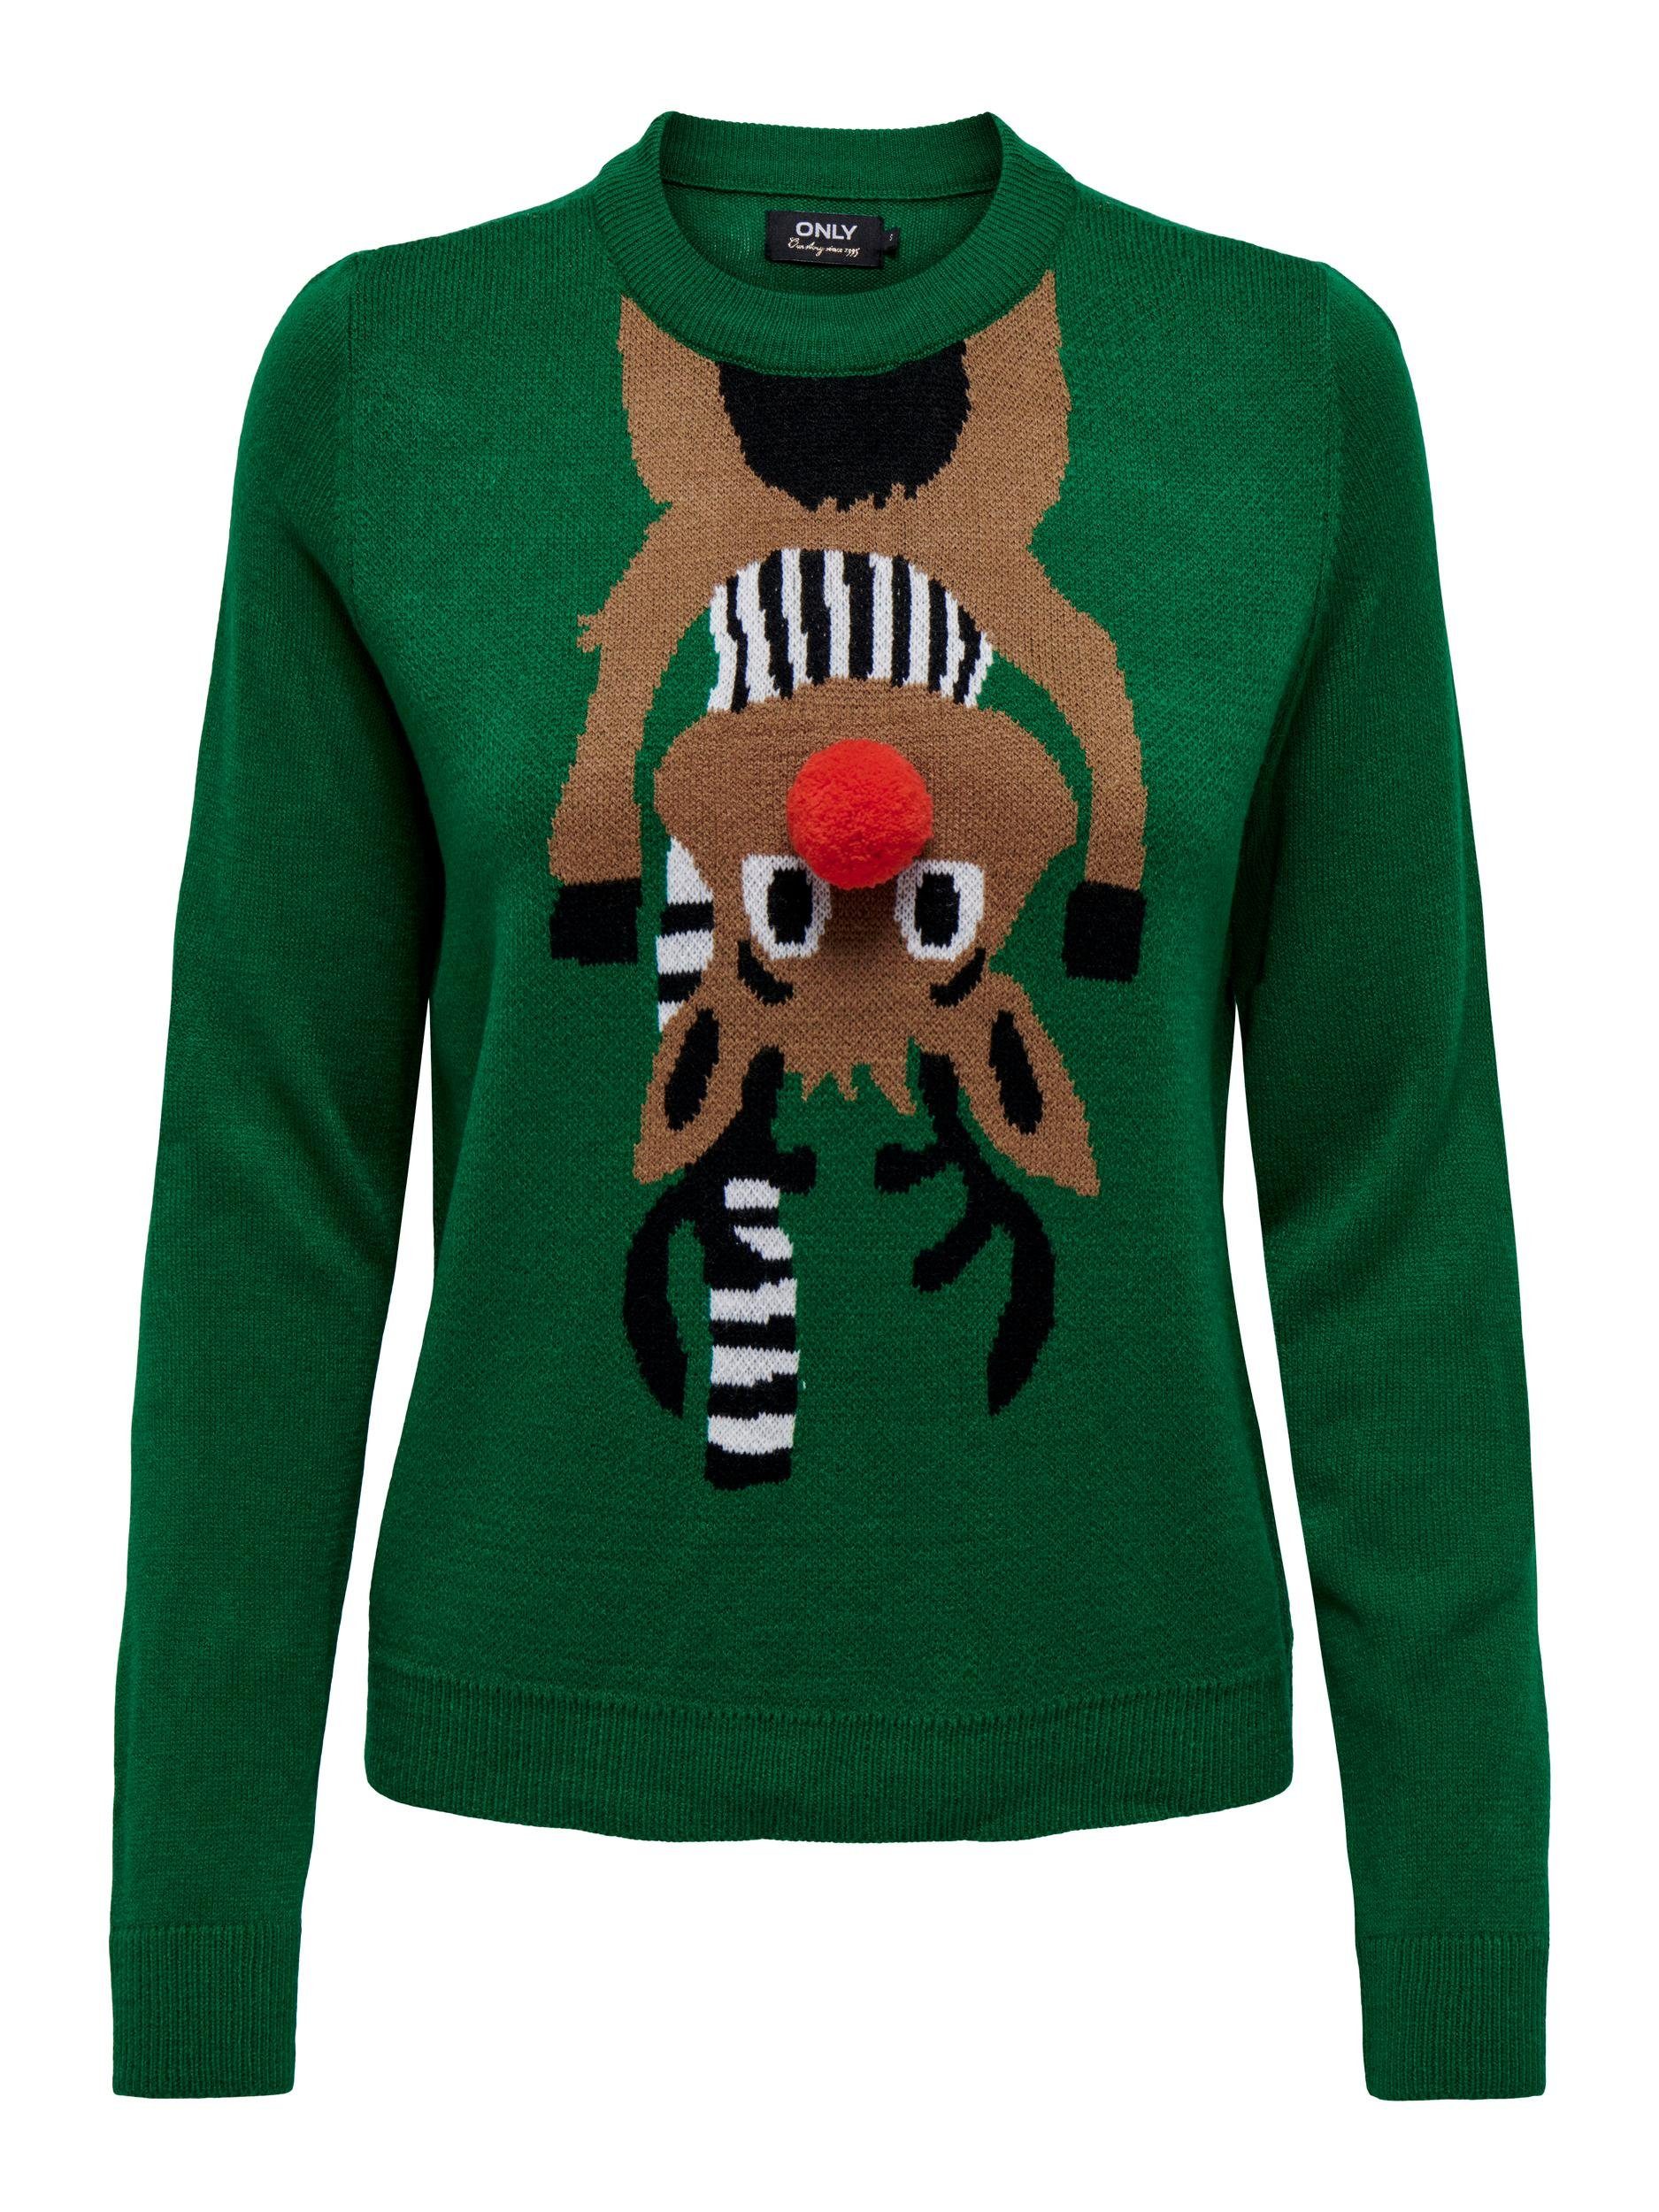 Red/Black/CD/Toasted Jacket Pattern:Poppy ONLXMAS Weihnachtspullover DEER BOX ONLY Green KNT O-NECK Coconut LS